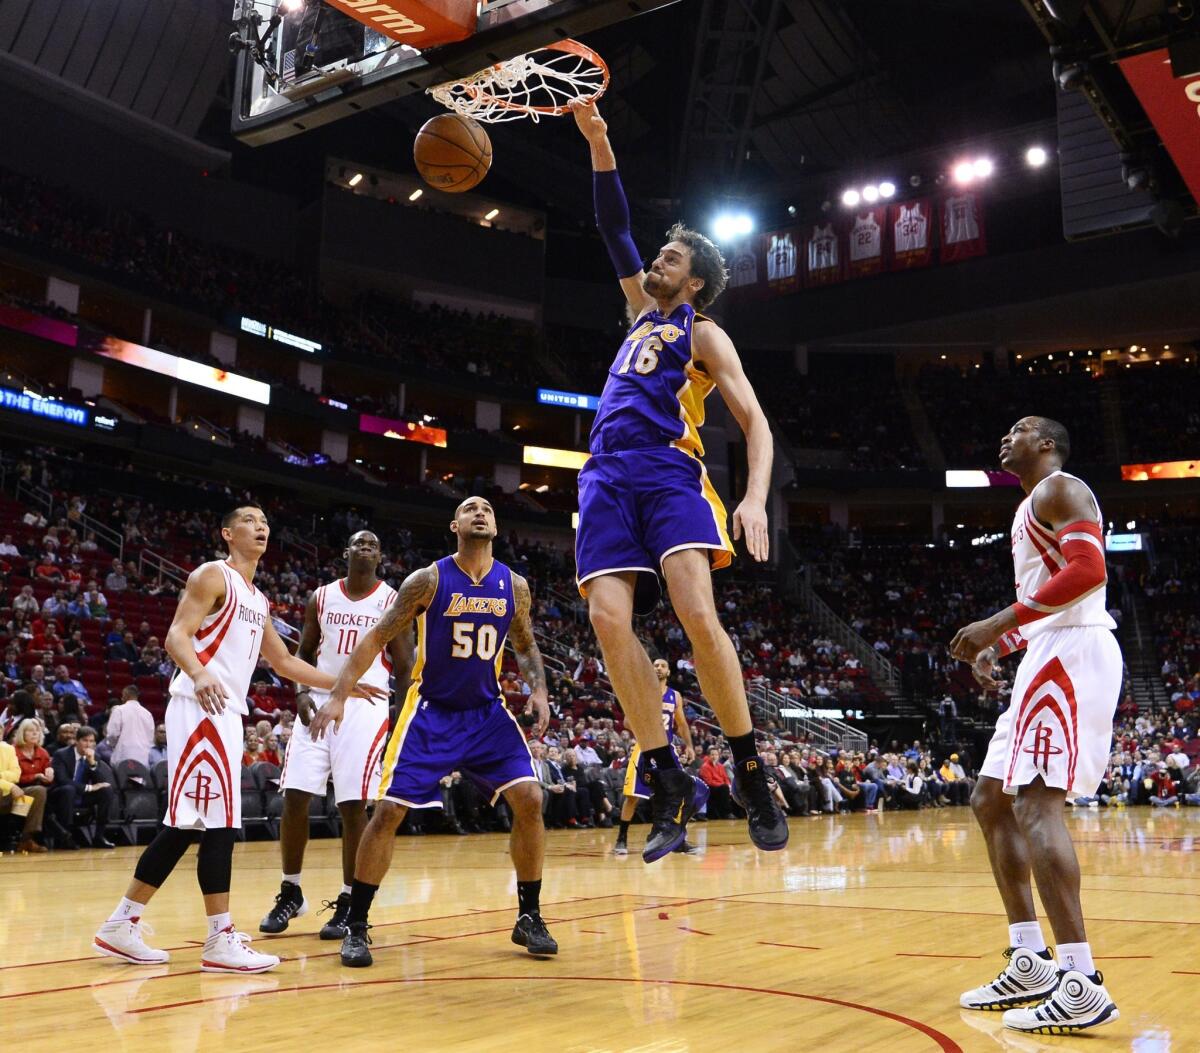 Lakers center Pau Gasol dunks during the first half of the team's 113-99 loss to the Houston Rockets on Wednesday.